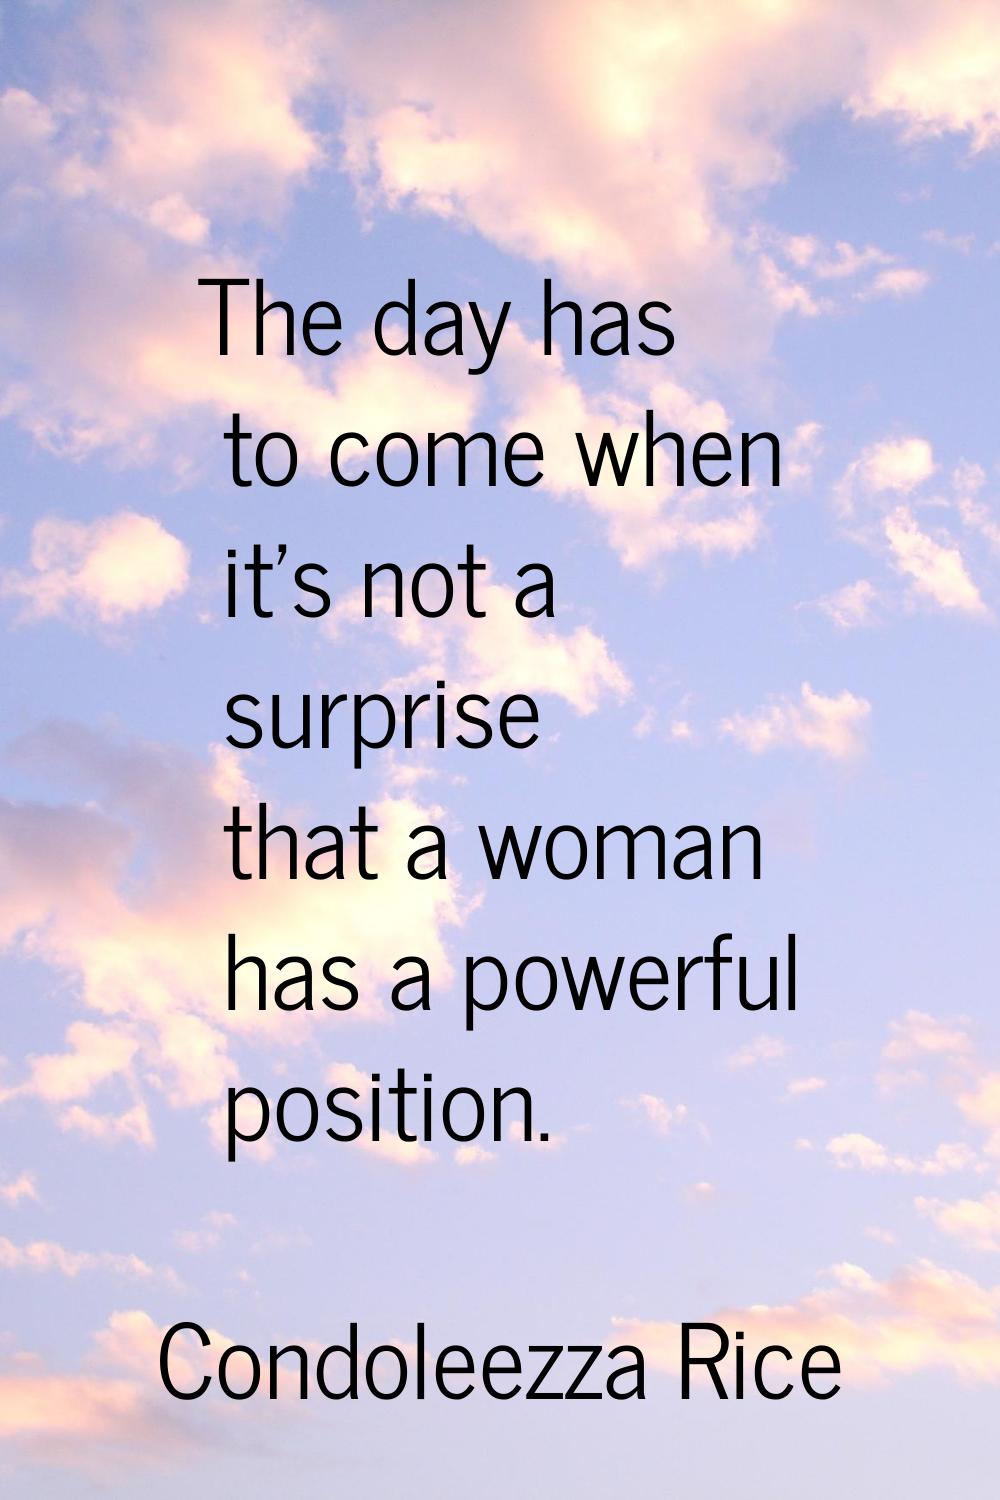 The day has to come when it's not a surprise that a woman has a powerful position.